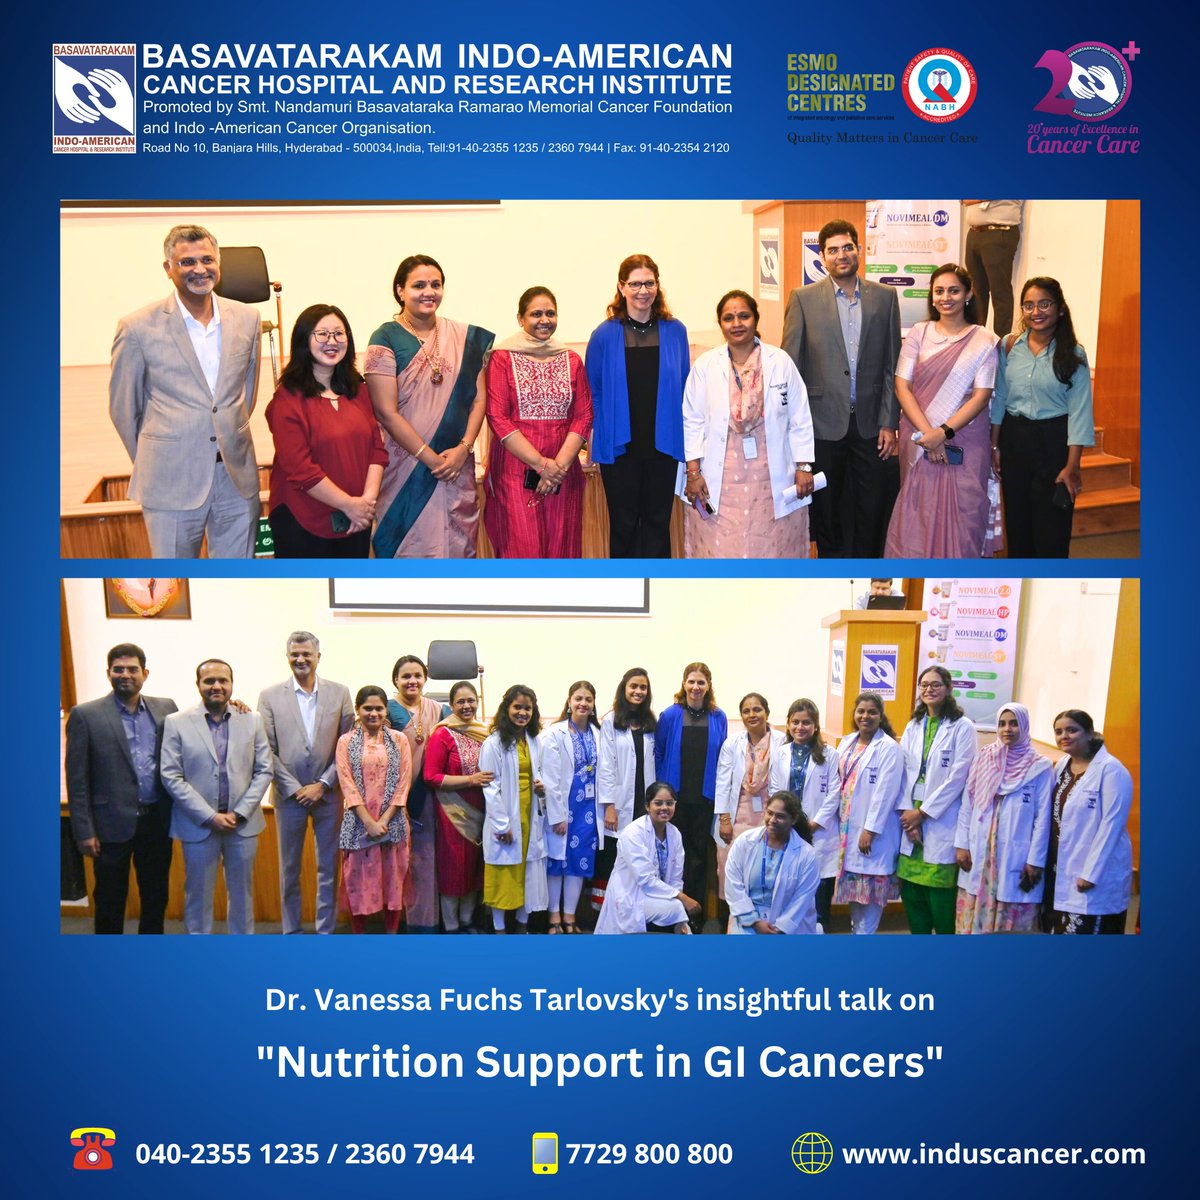 optimizing patient outcomes in gastrointestinal cancer care.

Stay tuned for more empowering events and educational opportunities at BIACH&RI! (3/3)

#nutritionsupport #GIcancer #EmpoweringCare
#BasavatarakamCancerHospital #IndoAmericanHospitalHyderabad #indoamericanhospital